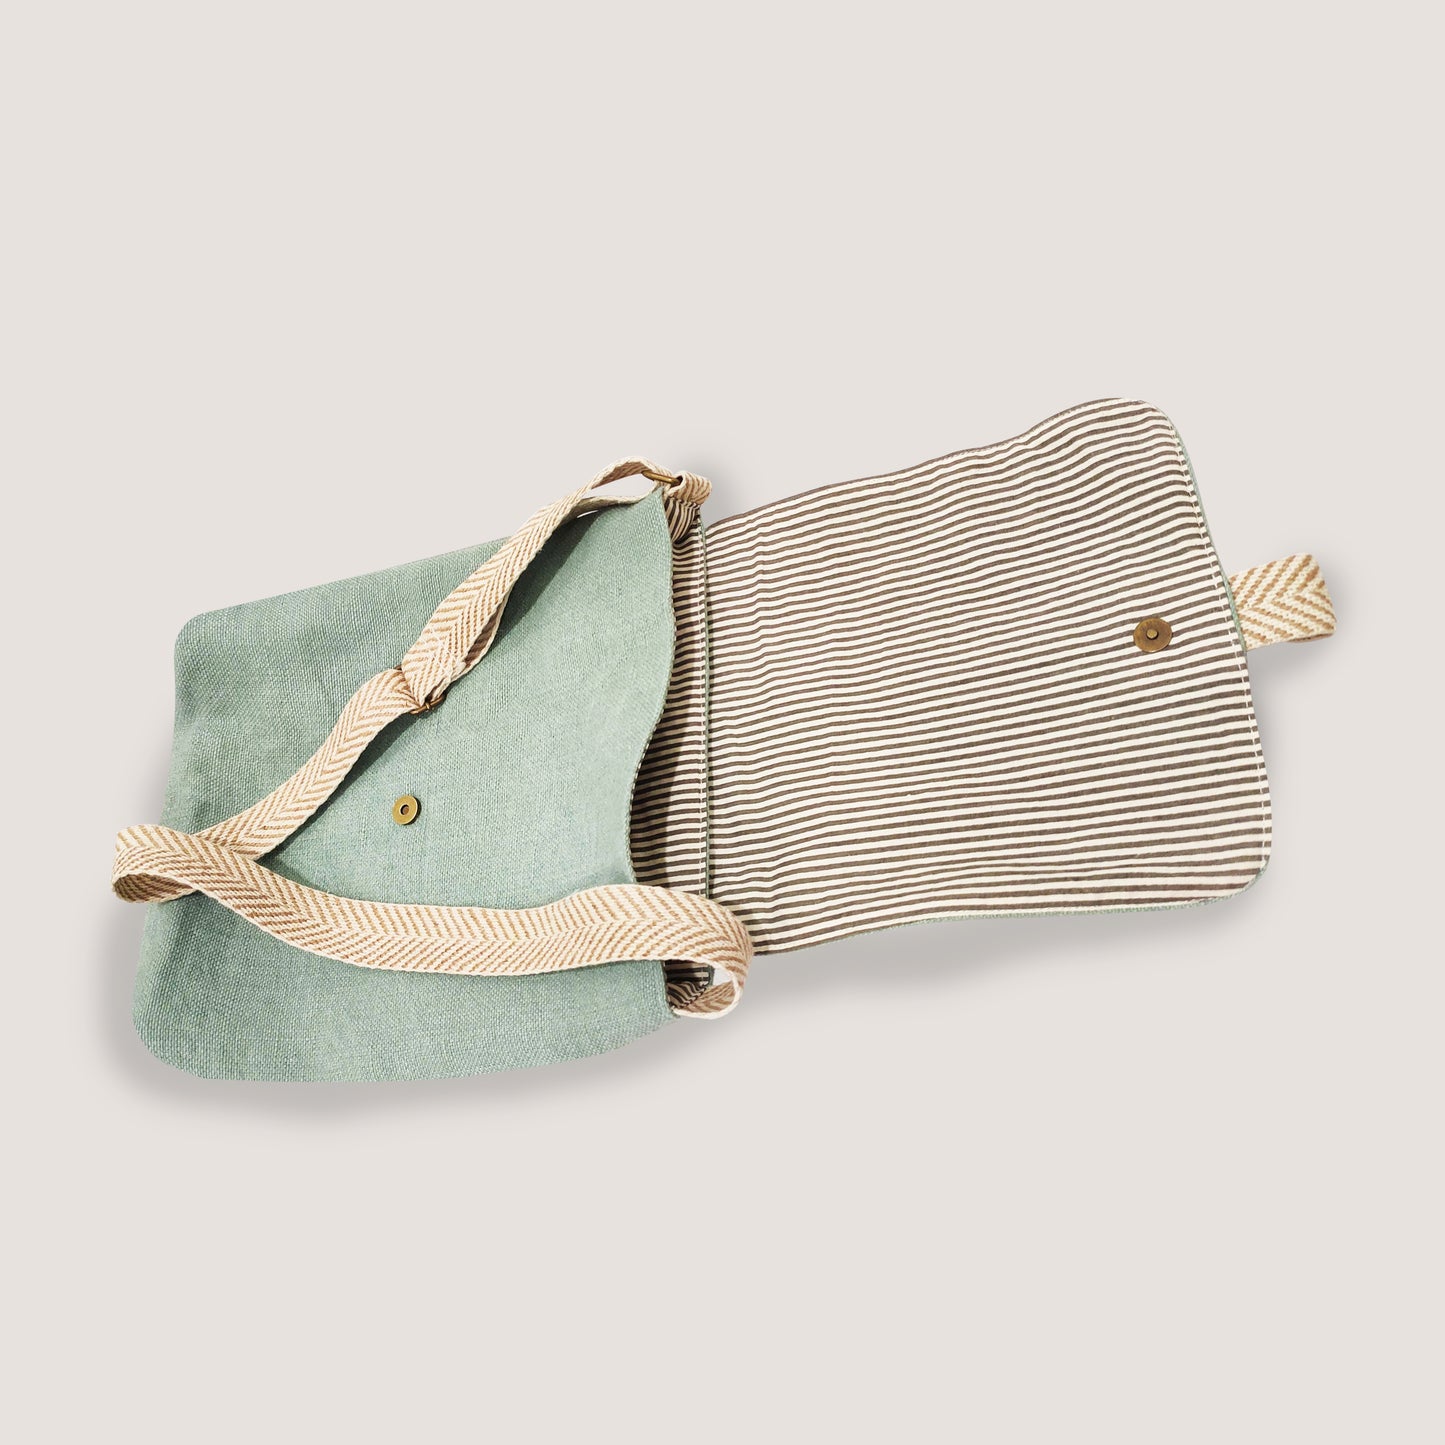 EARTHBAGS WASHED JUTE CANVAS SLING BAGS